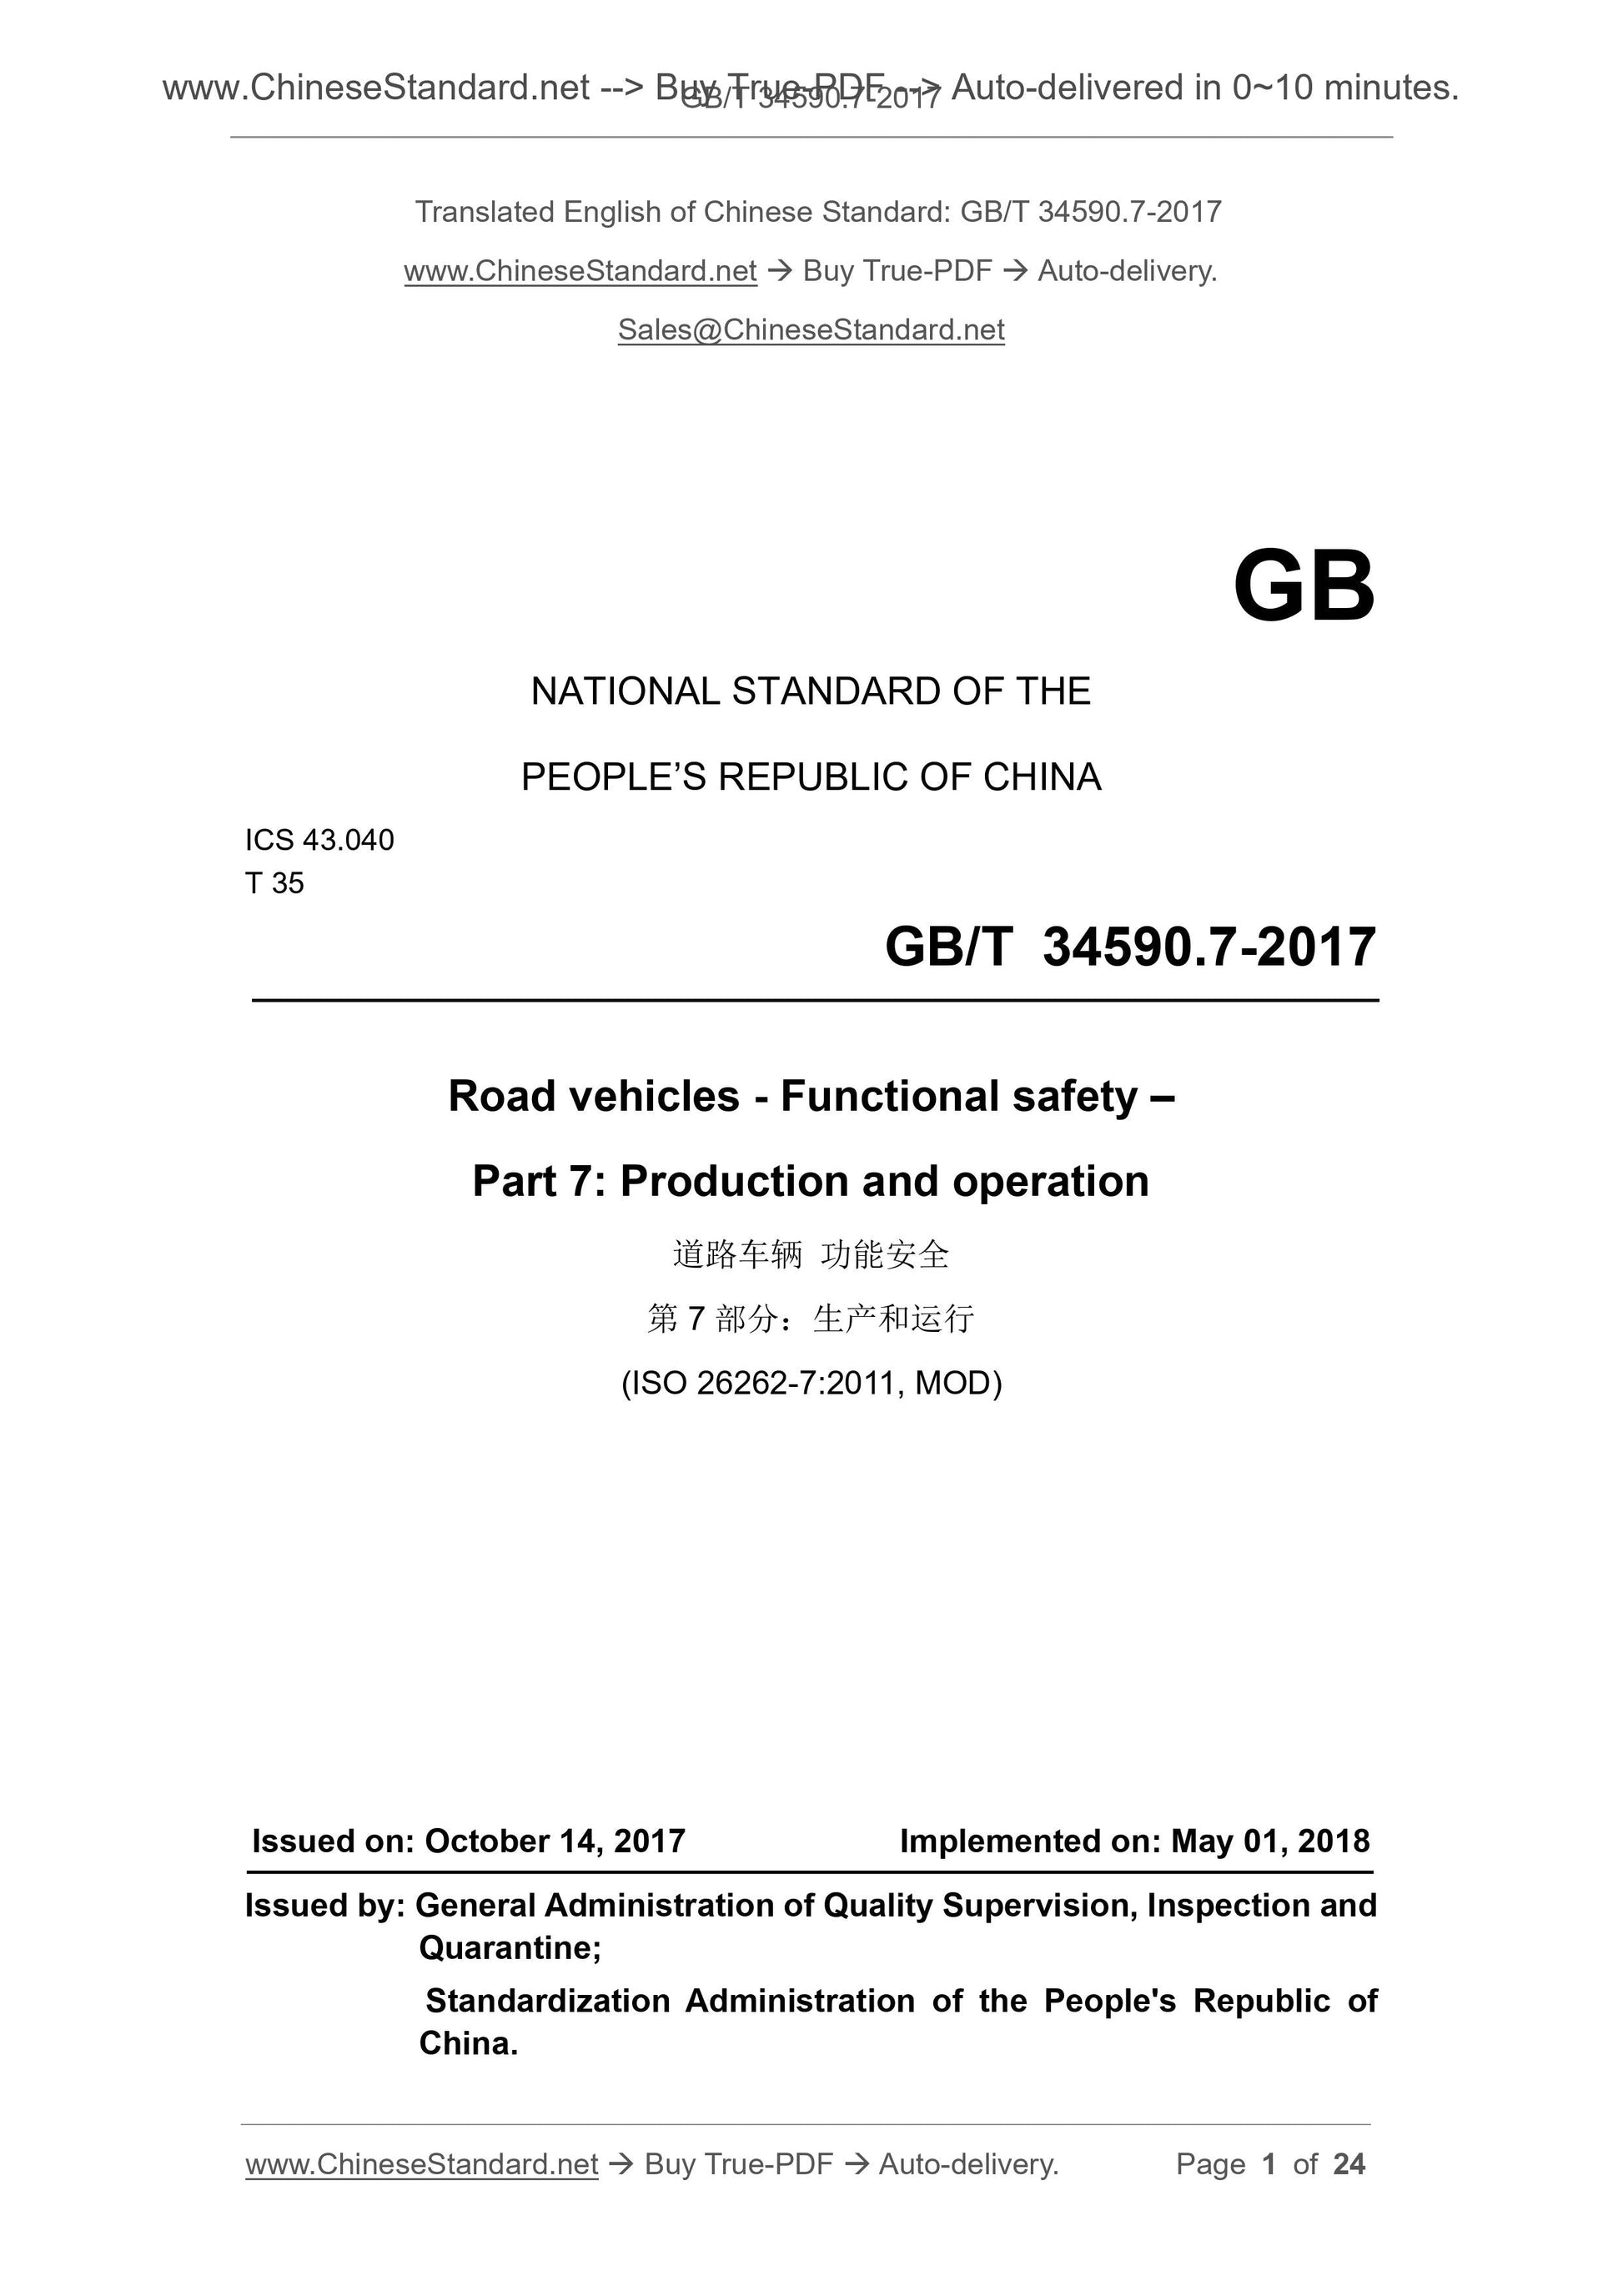 GB/T 34590.7-2017 Page 1